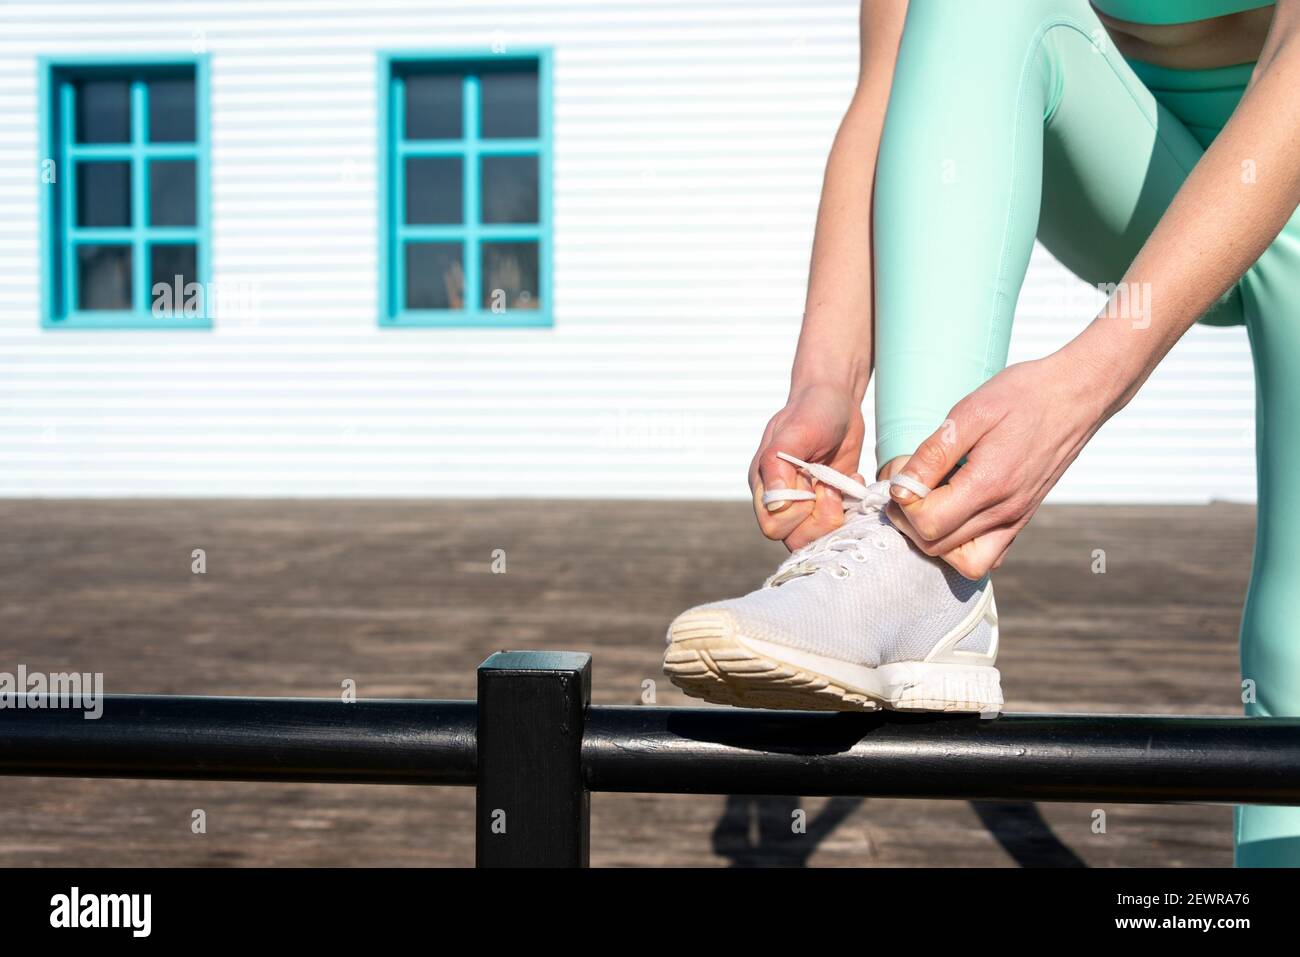 Woman wearing sportswear tying up her trainers, preparing to exercise or run outside. Stock Photo